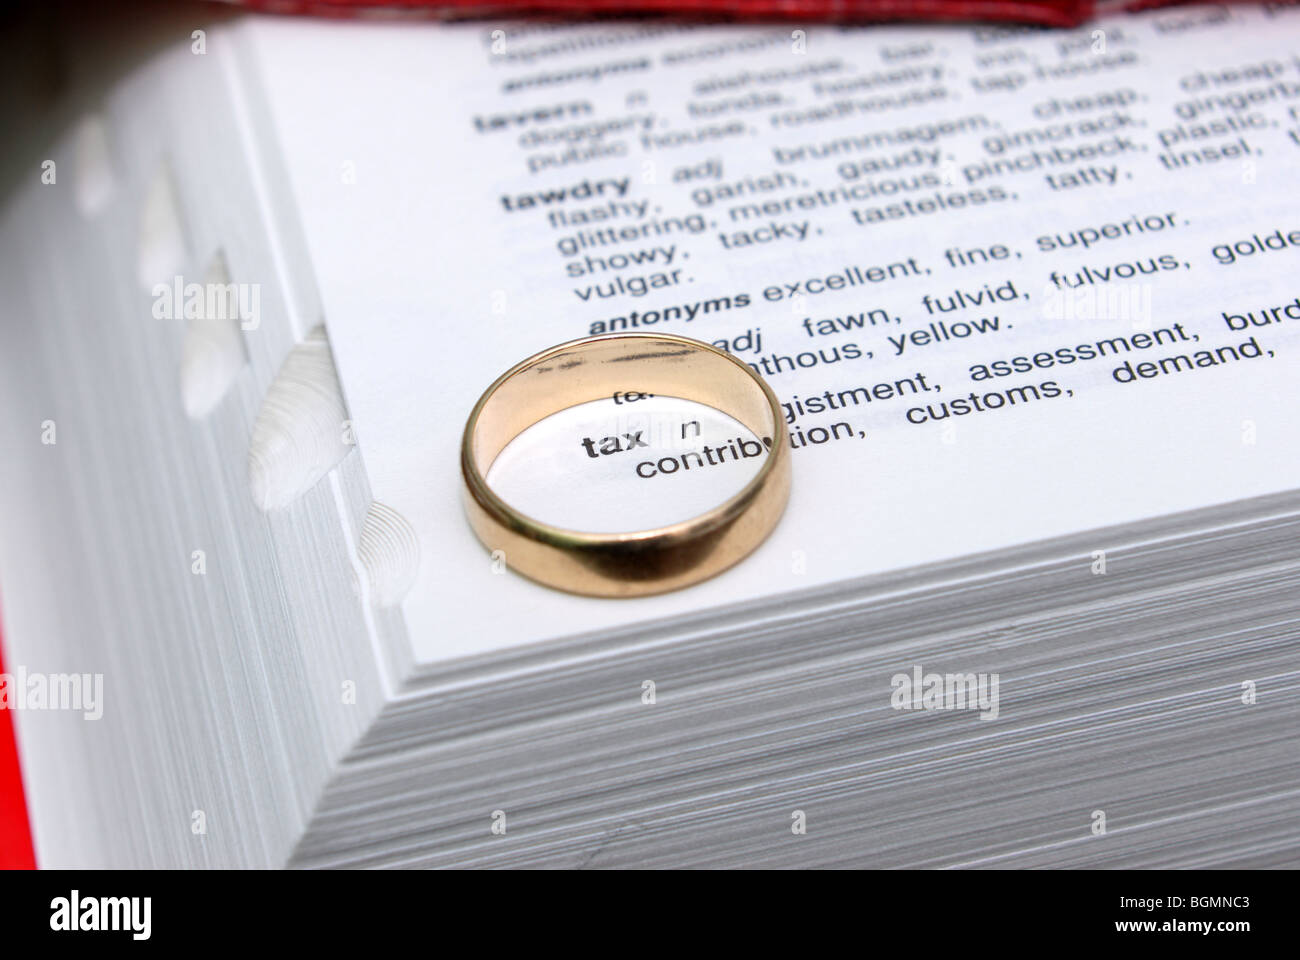 wedding-ring-on-dictionary-and-thesaurus-with-the-words-tax-and